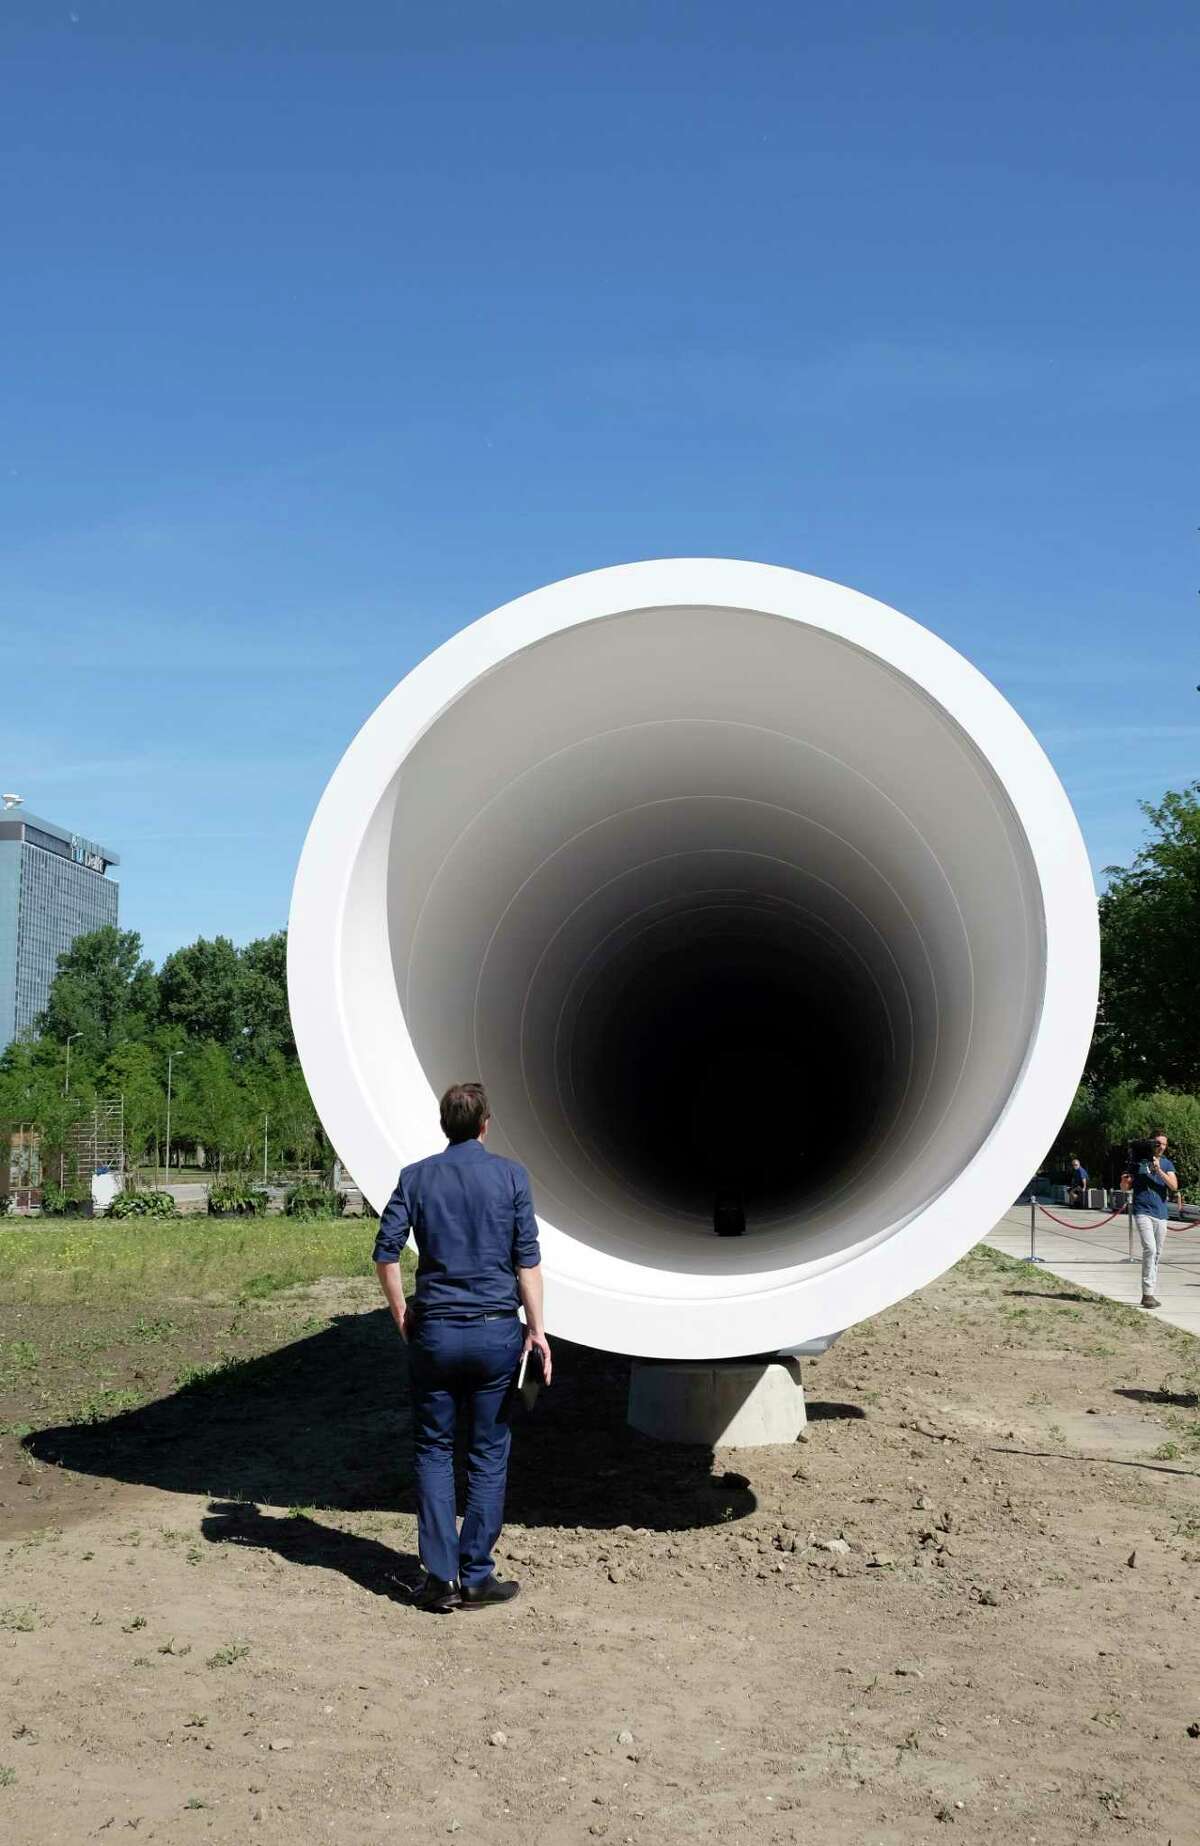 A man looks at a hyperloop test facility unveiled by a tech startup and a construction company in Delft, Netherlands, Thursday, June 1, 2017. The 30 meter (100 foot) long white steel tube will be used to help develop the futuristic high-speed transportation system. The tube is a first step toward developing the system in the Netherlands, a key European transportation transport hub. (AP Photo/Mike Corder)